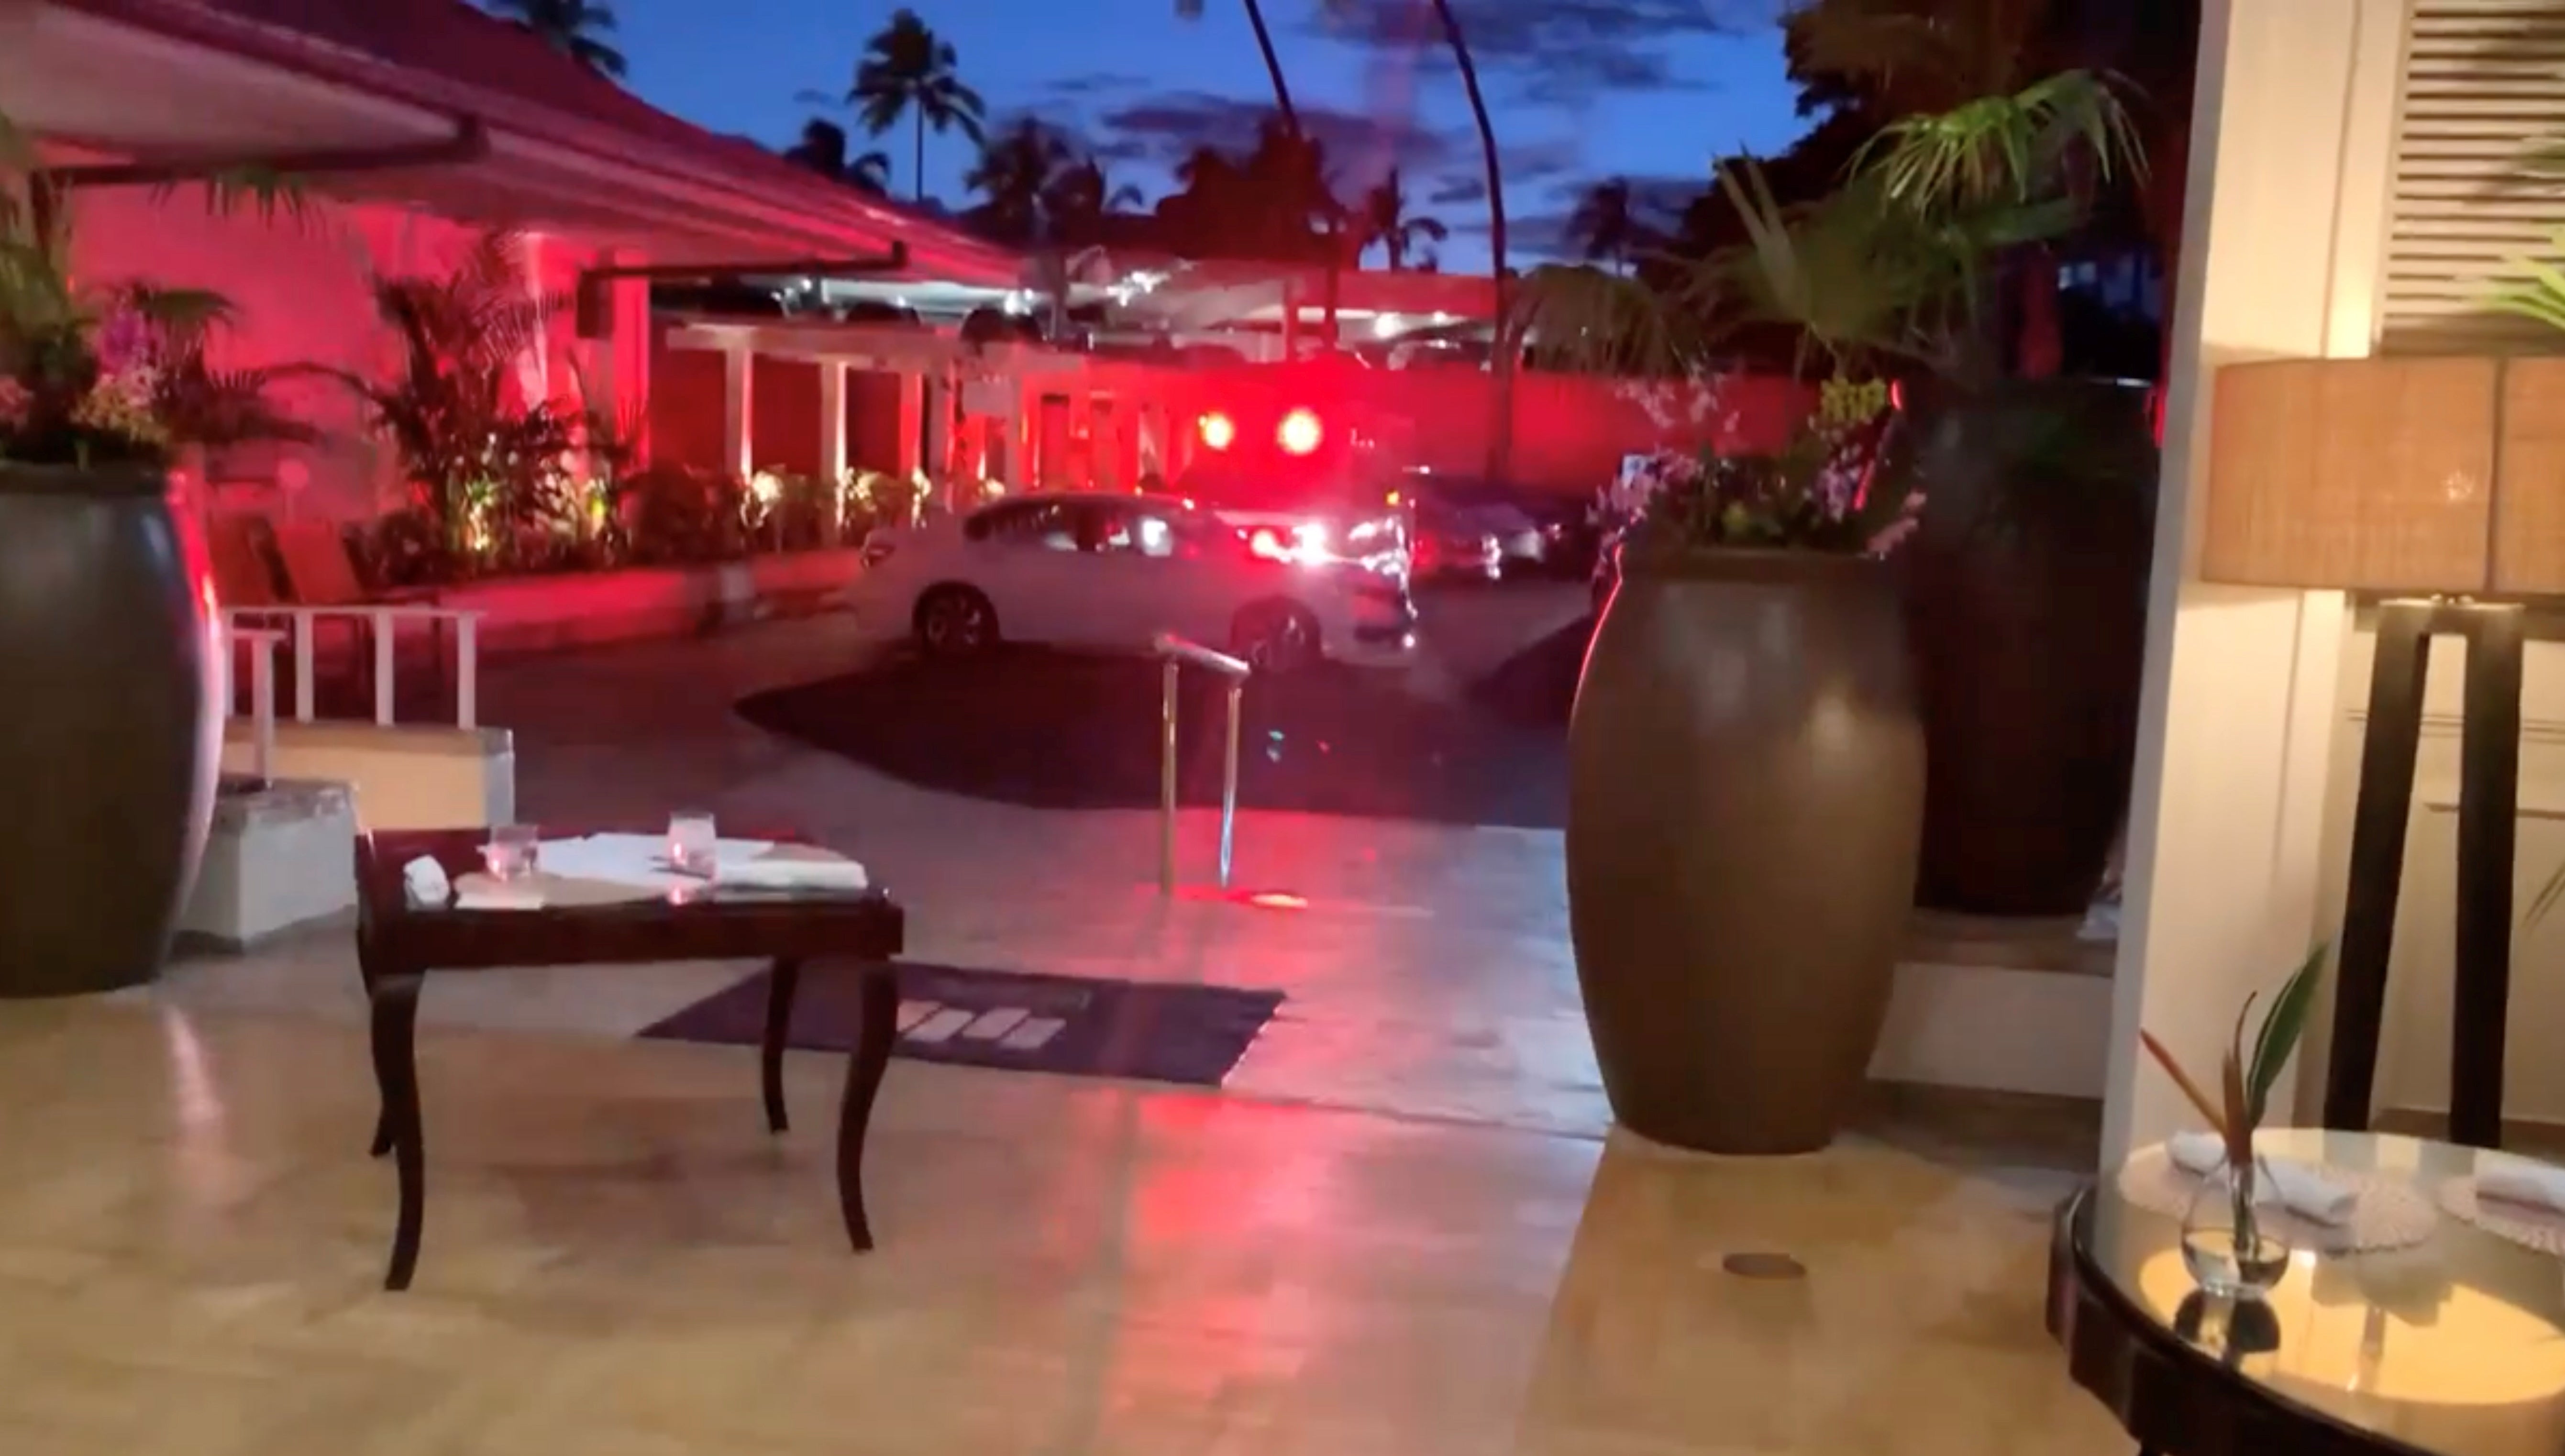 A screenshot of a video posted on Twitter by Elizabeth Ferraro from inside the Kahala Resort & Hotel in Honolulu which went into a ten-hour lockdown on Saturday after a gunman opened fire on staff